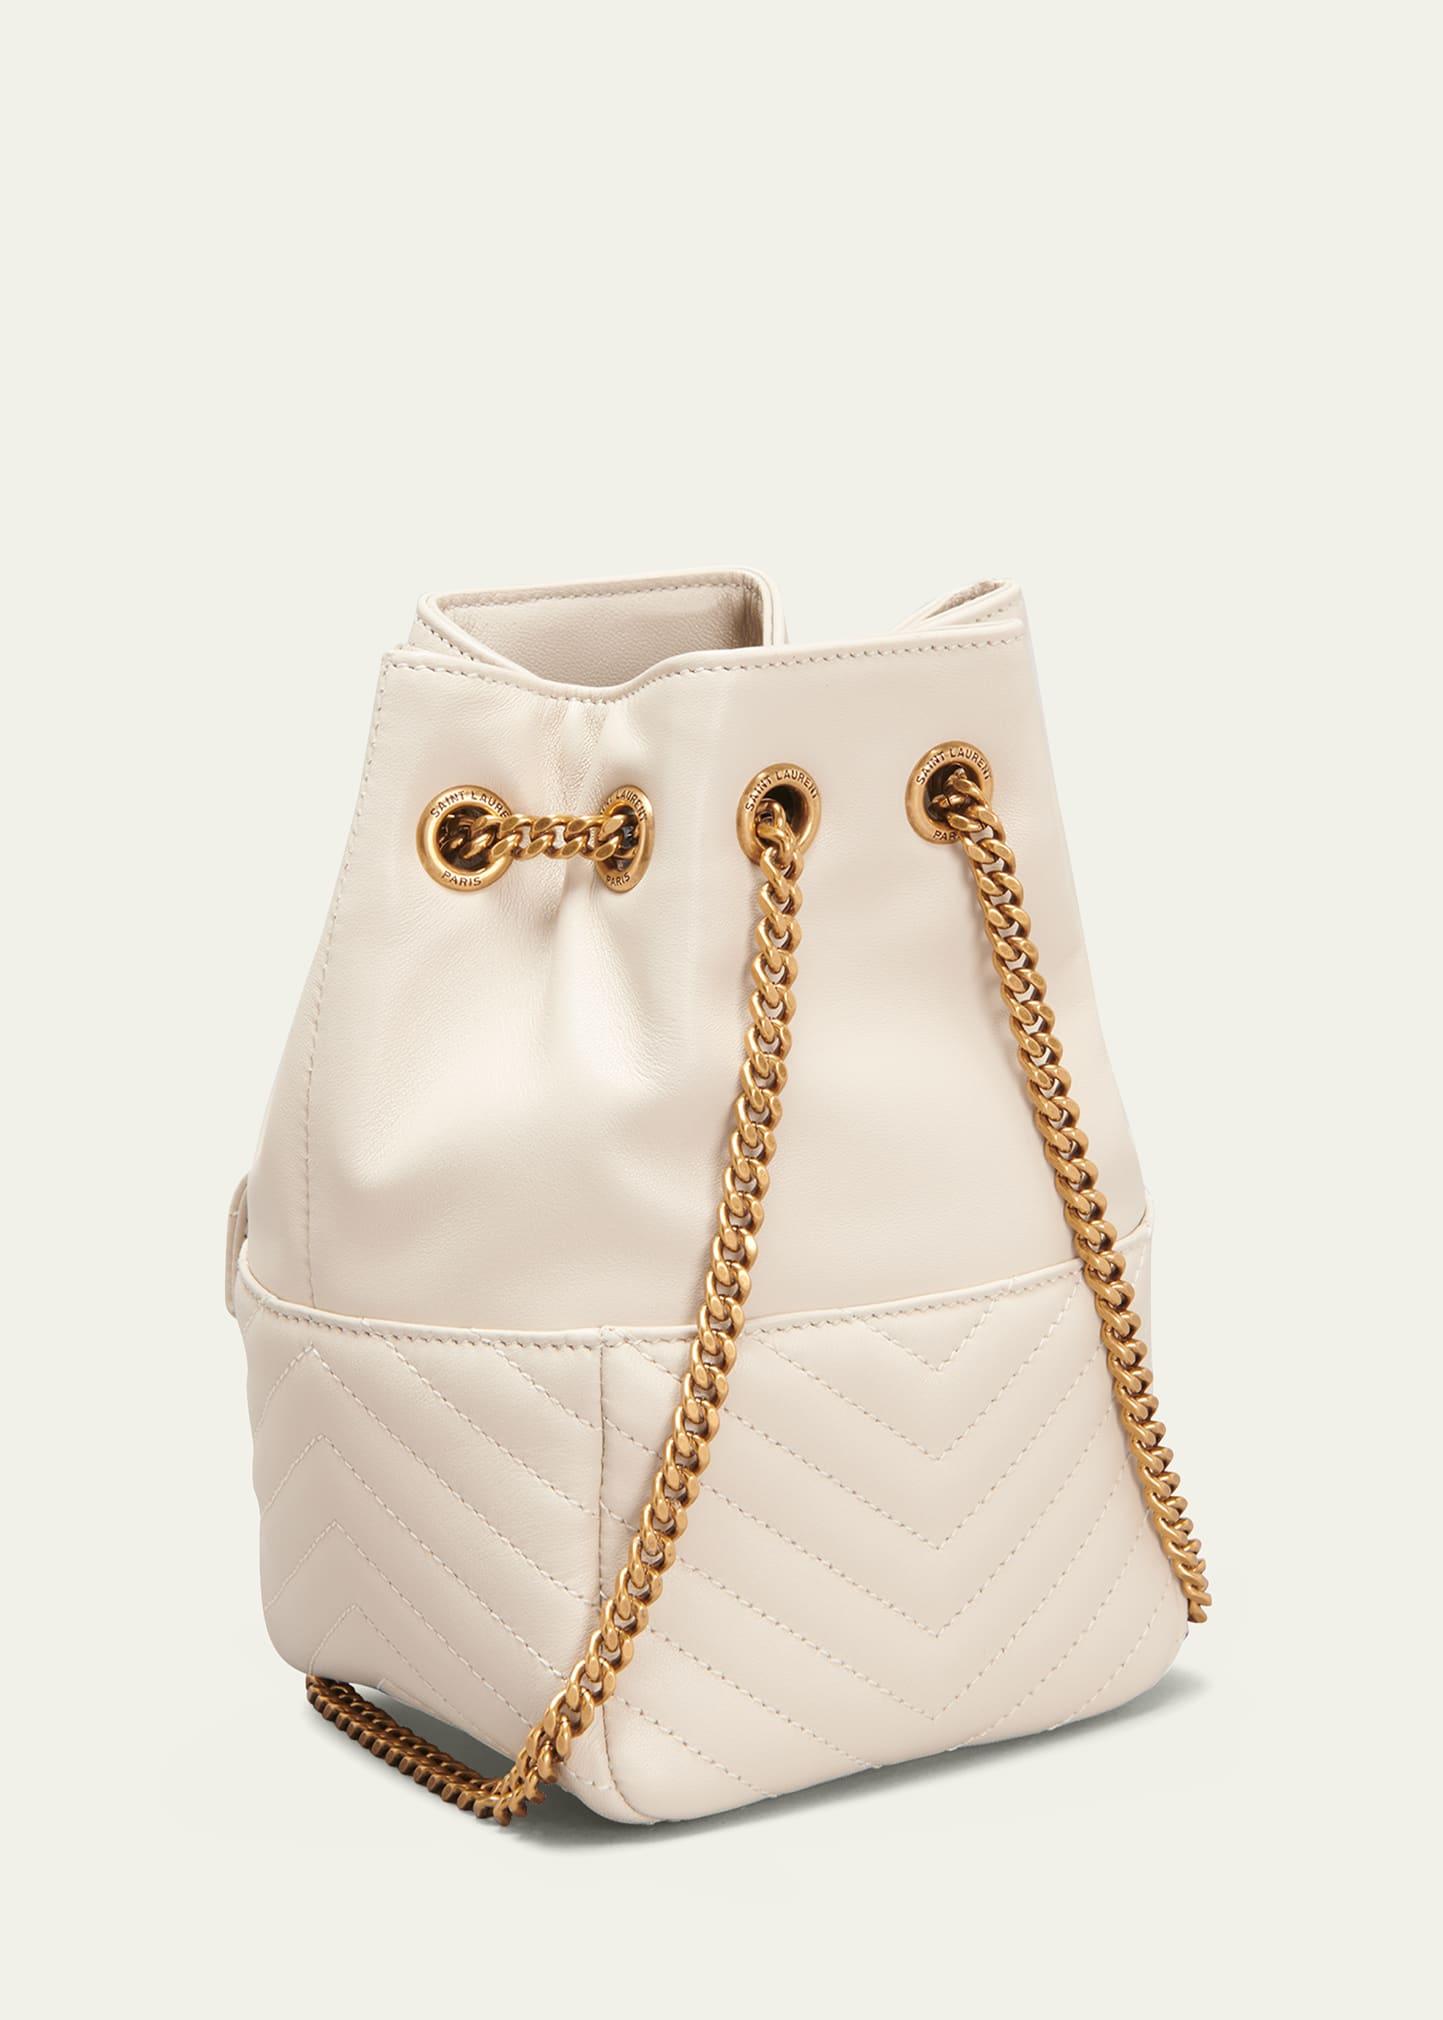 Toutou Quilted Bucket Bag, Luxury Brand Crossbody Bag with Chain Strap, Exquisite and Stylish Large